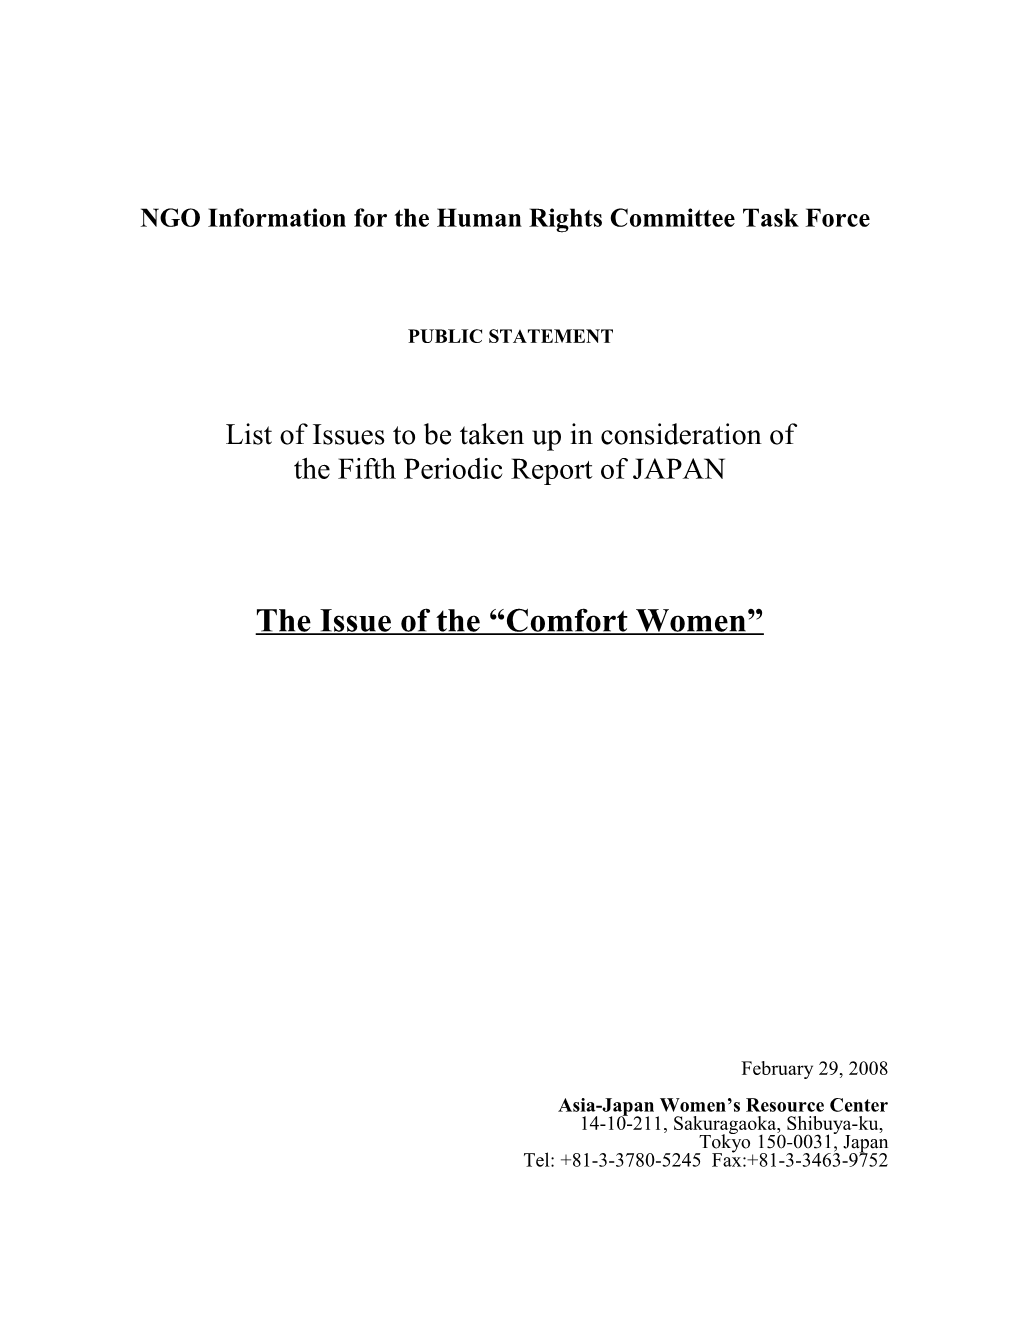 Information for the Human Rights Committee Task Force on the Examination of the Fifth Japanese